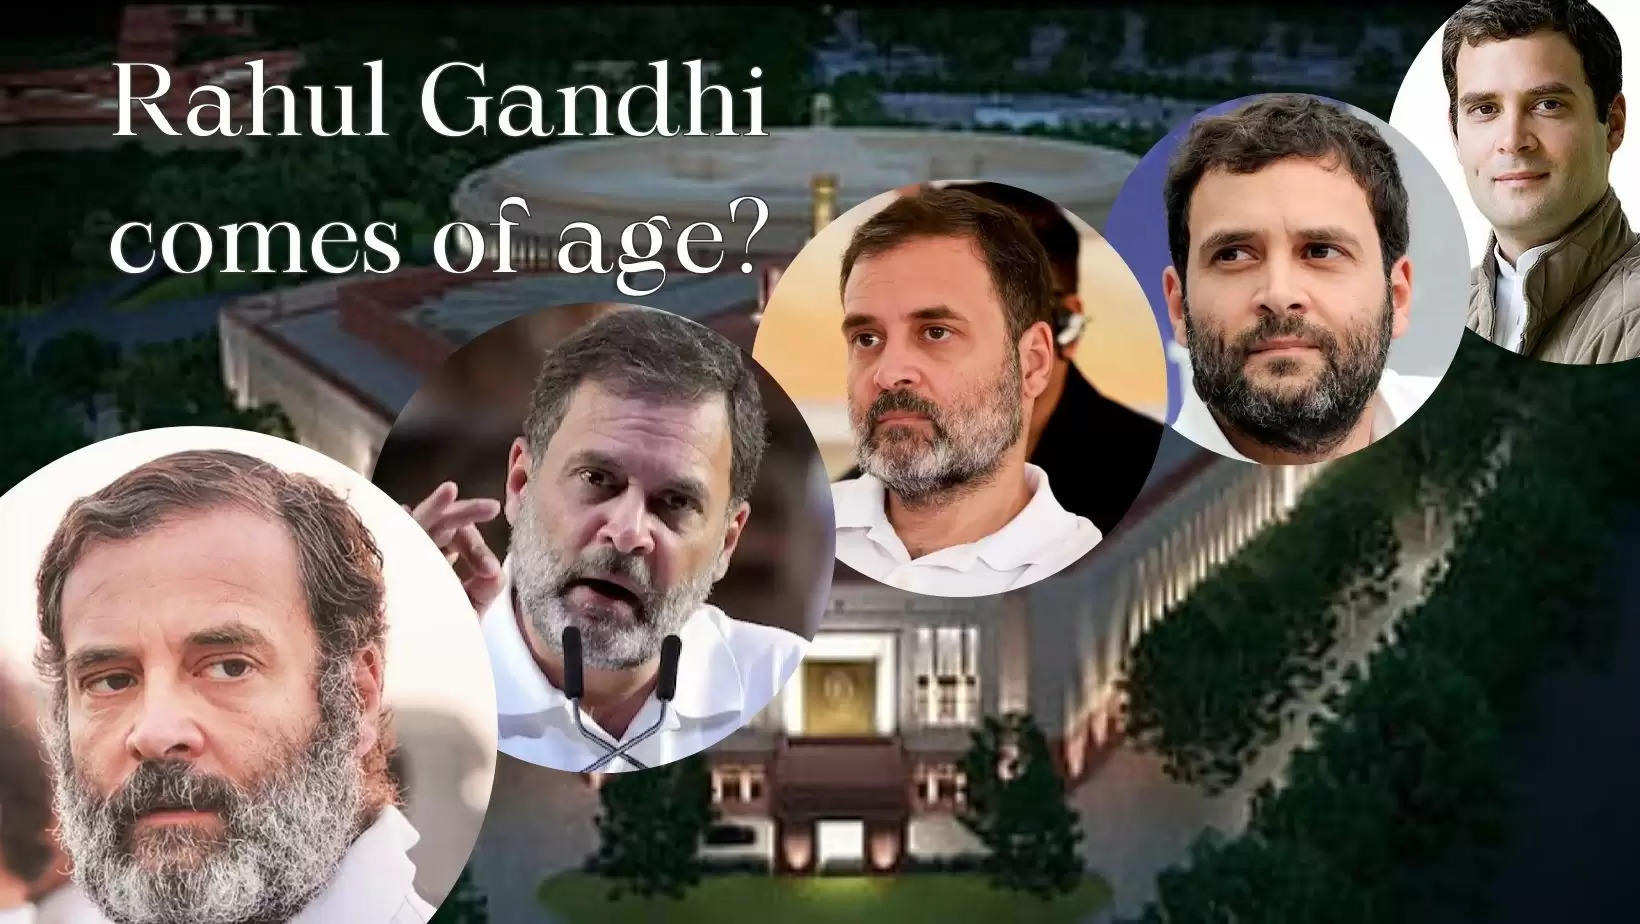 With two massive victories, in Rae Bareili and Wayanad, and the way he led the INDIA bloc Rahul Gandhi's transition into a mature and civilised face of indian politics is apparent now. Rahul Gandhi comes of age